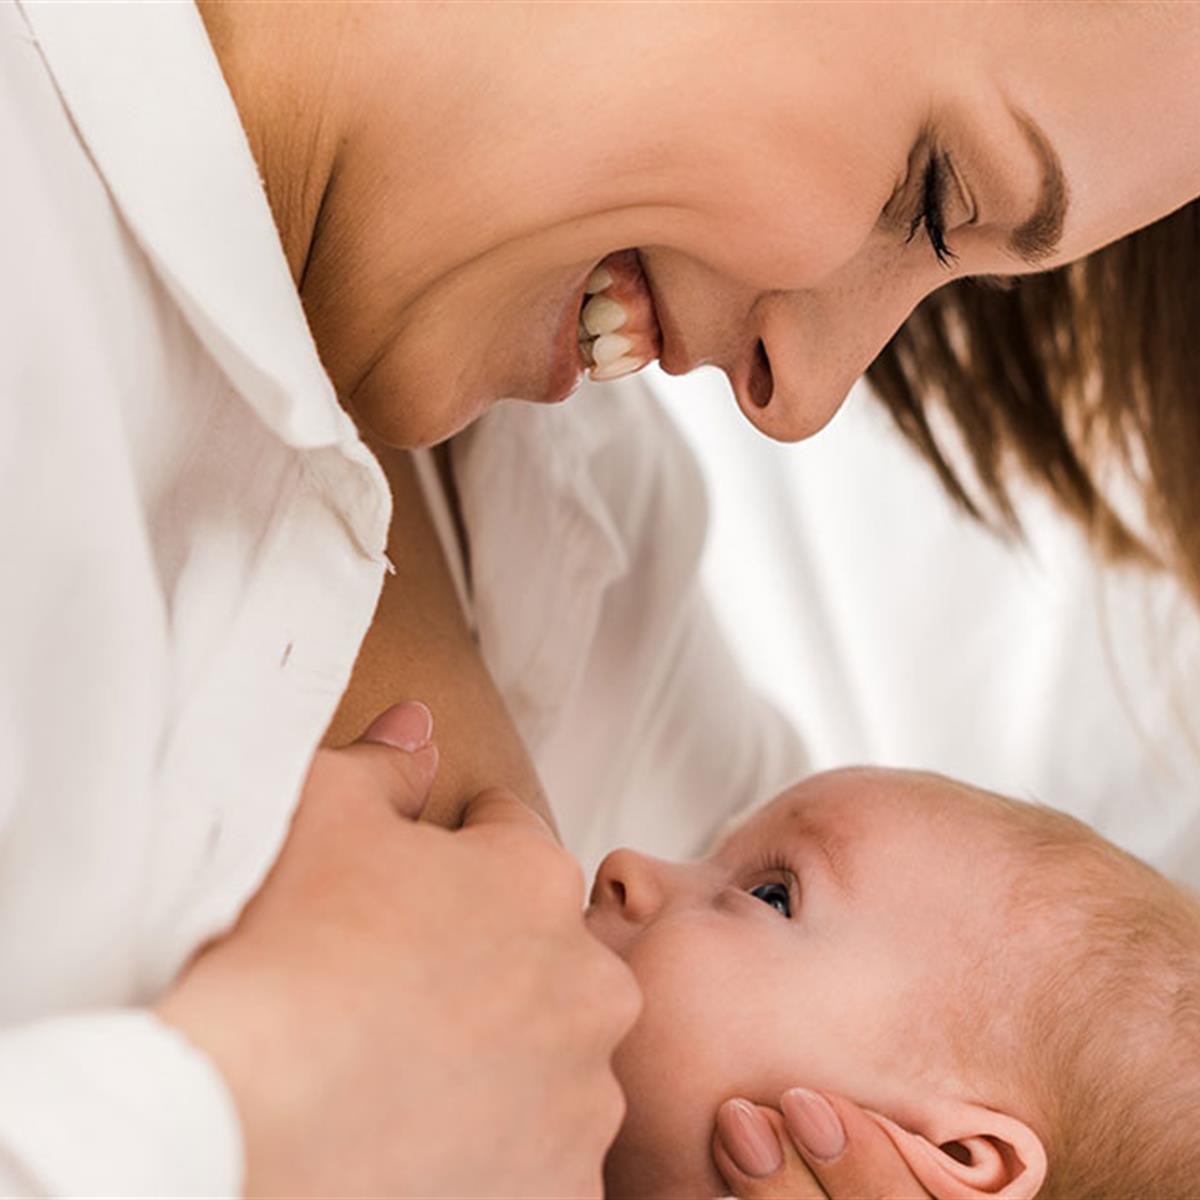 Milky Mama - Sore nipples while you are breastfeeding can be very  concerning, and painful! But how do you know when pain is normal and when  it's not? Be sure to **save**